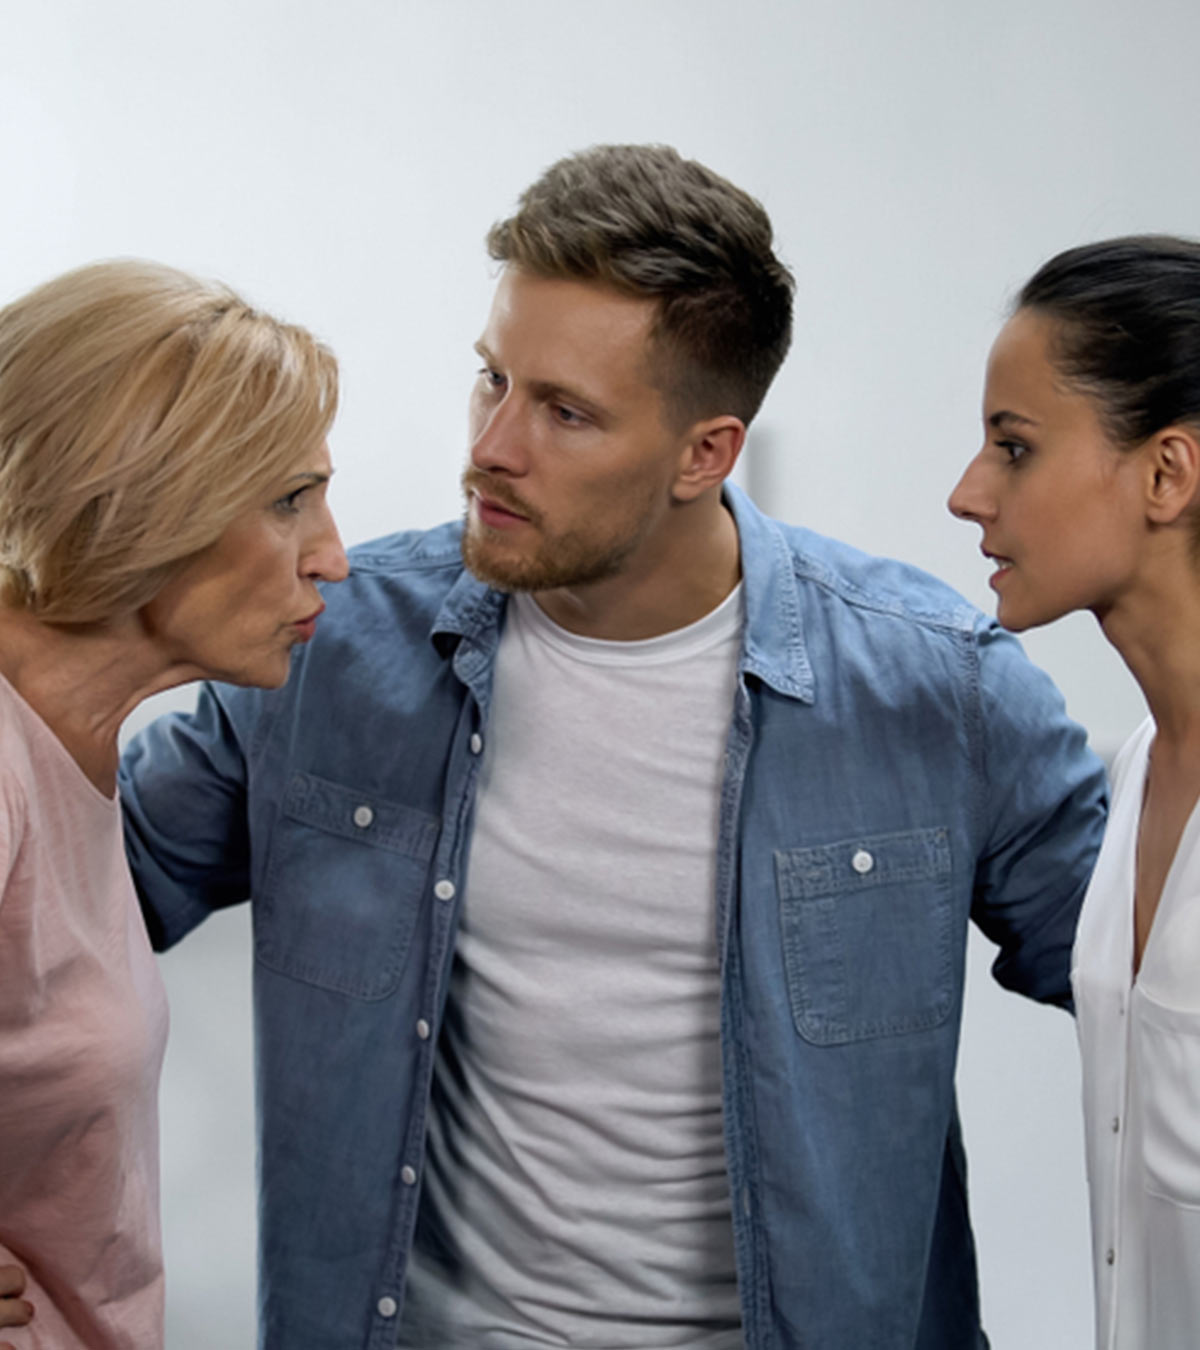 Are You Too Dealing With A Toxic Mother-In-Law?